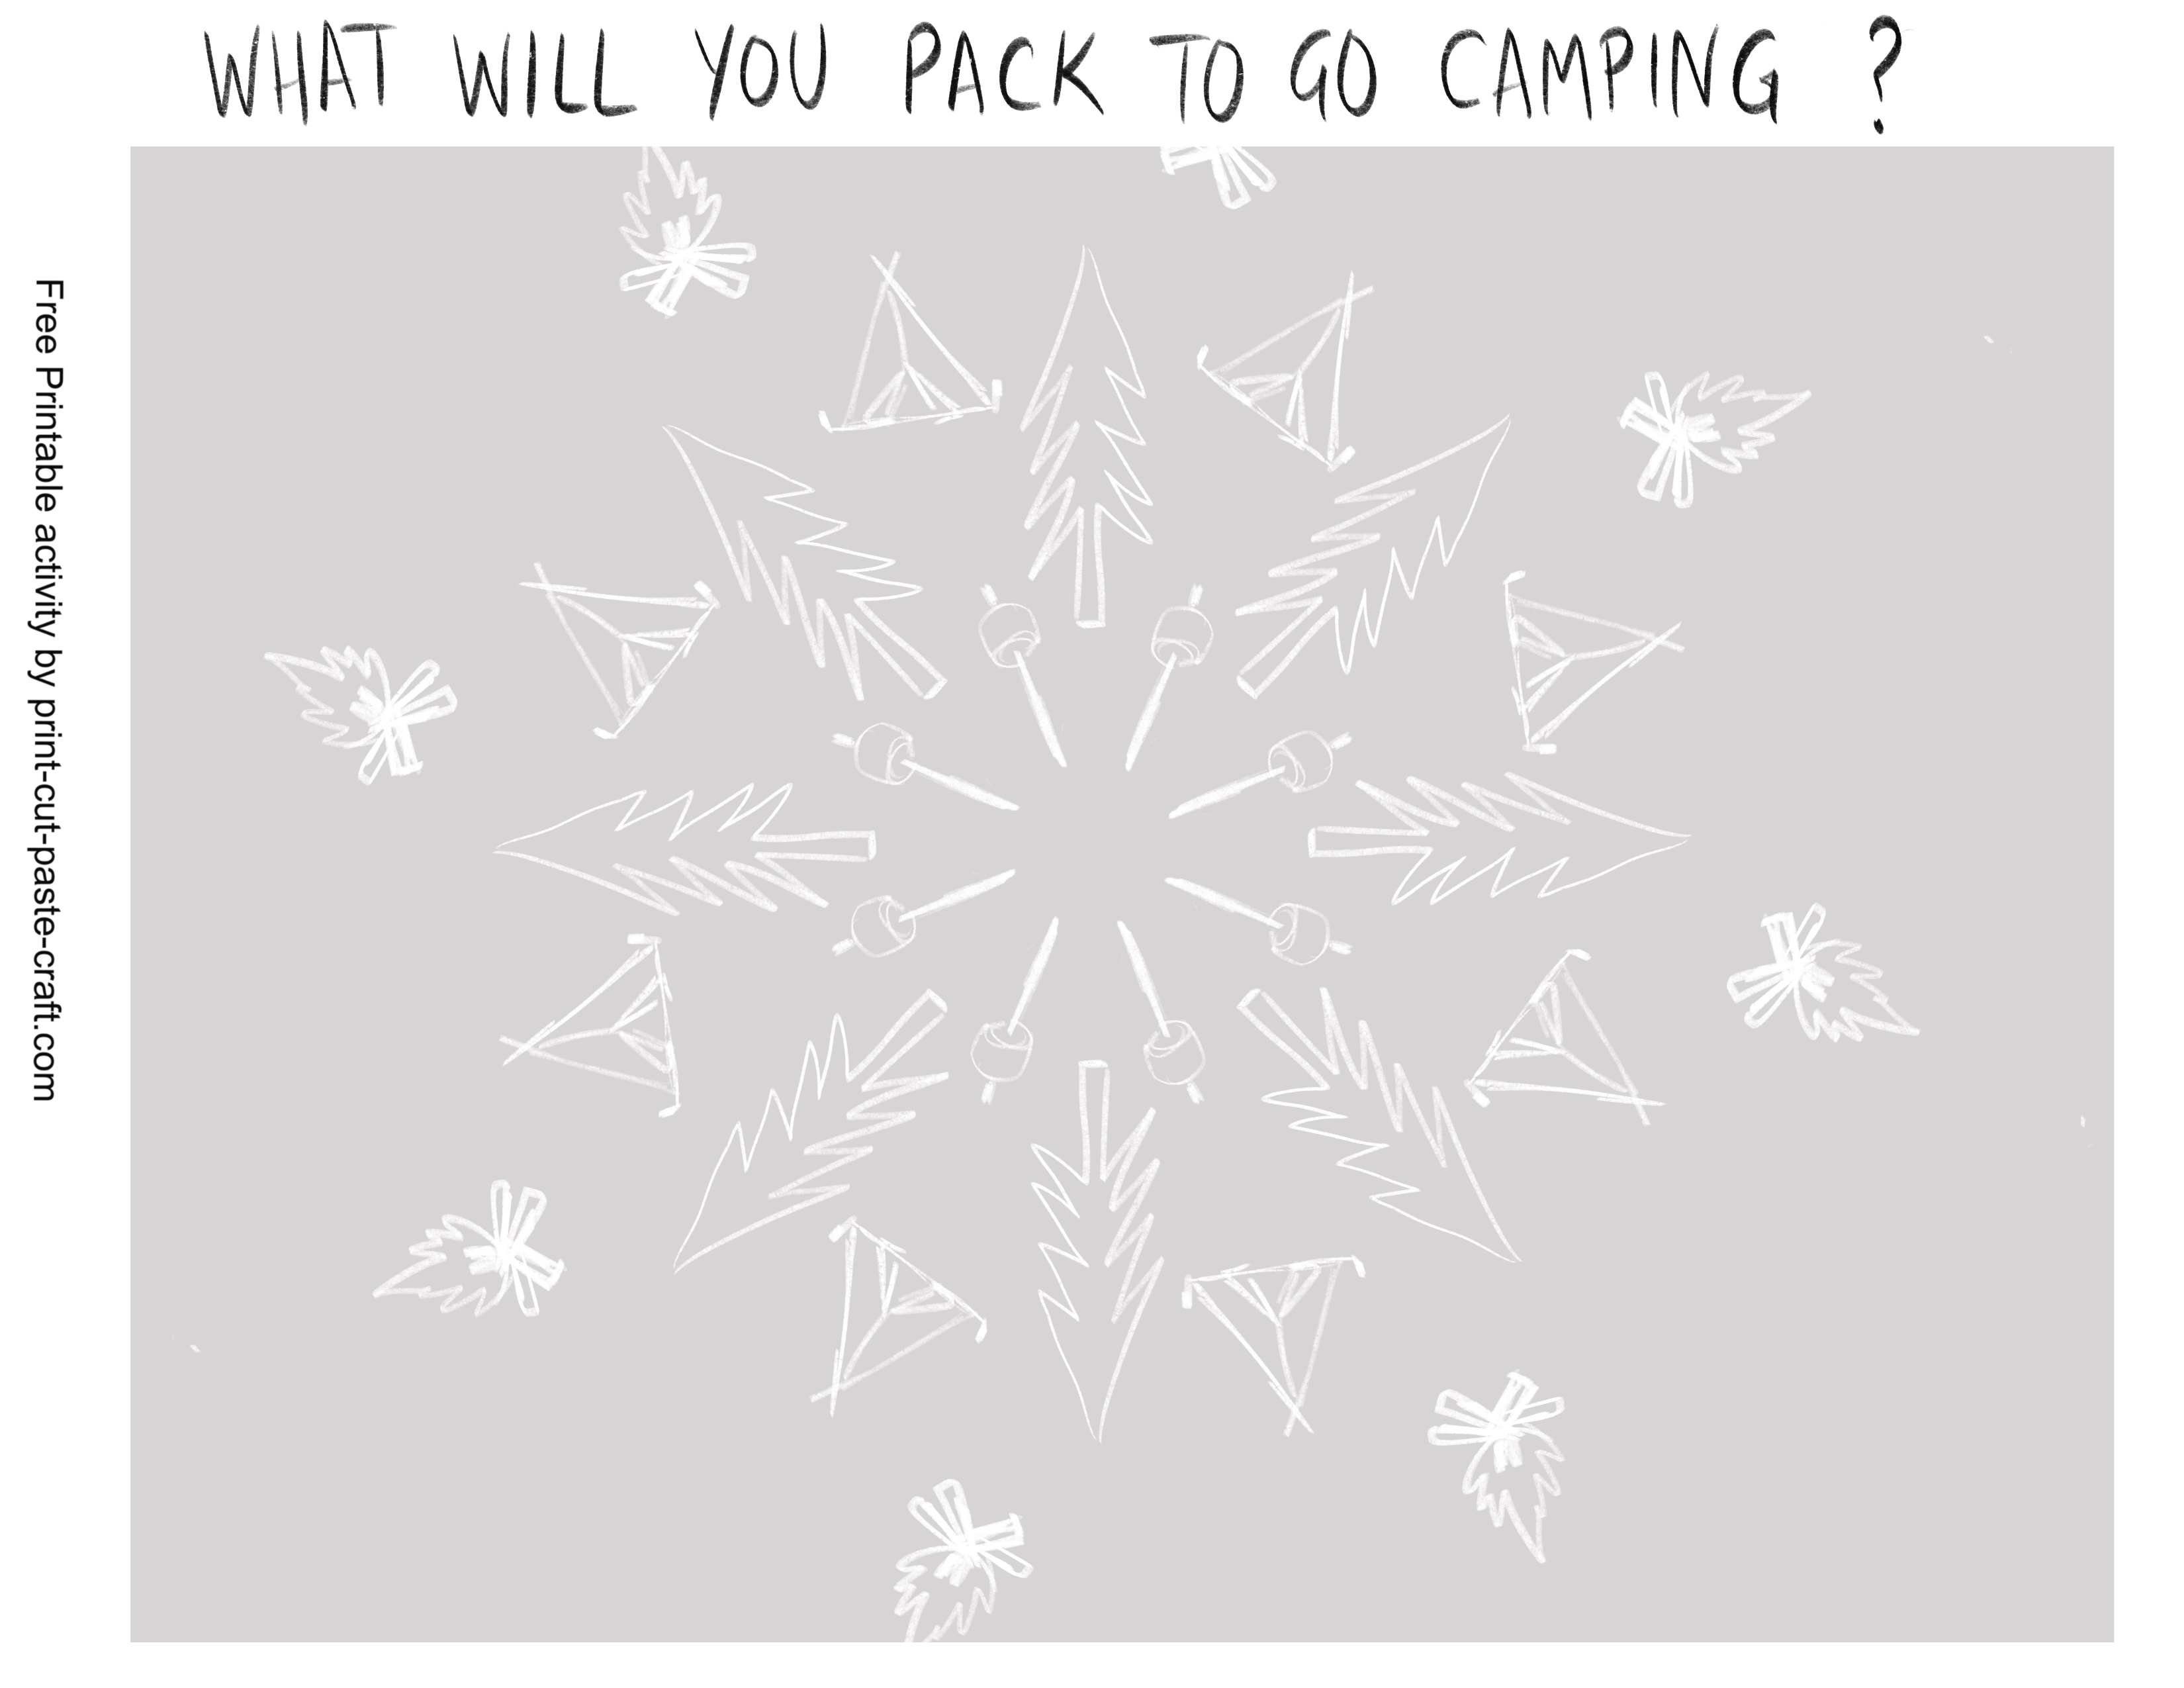 Beach or Camping free printable coloring and sorting activity for kids CAMPING SUITCASE by Print-Cut-Paste-Craft.com